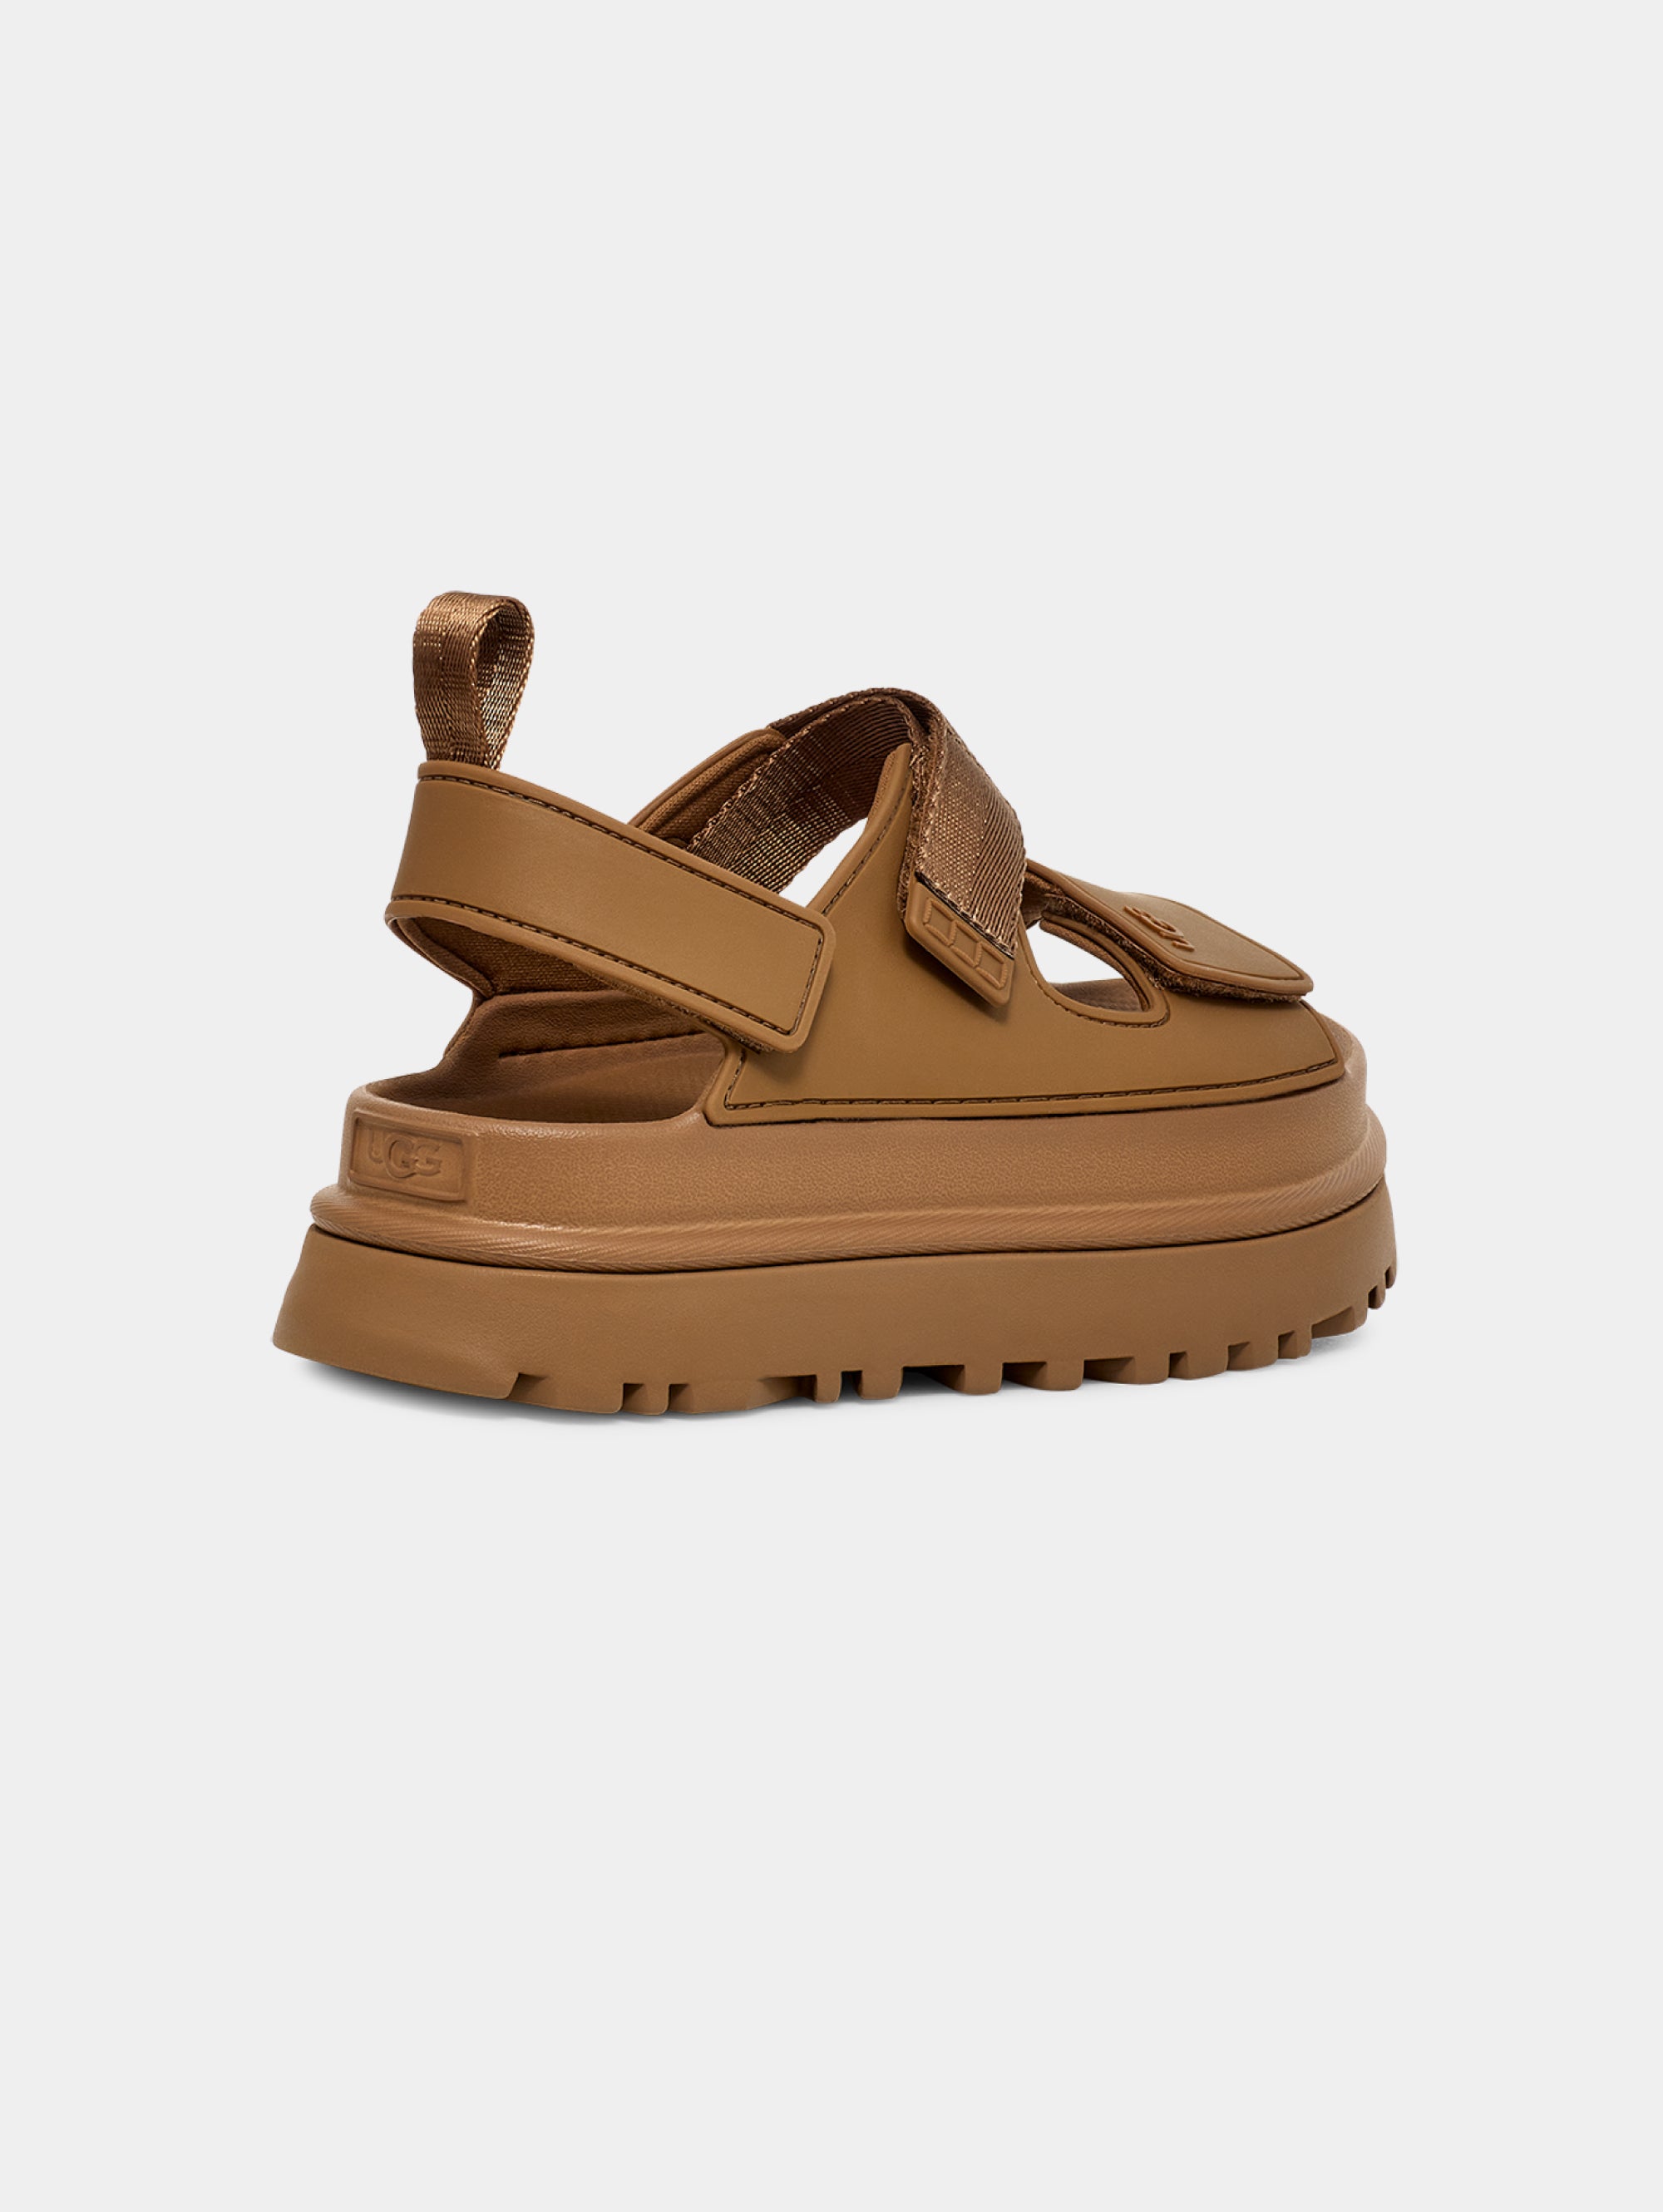 GoldenGlow Sandals in Brown Recycled Material